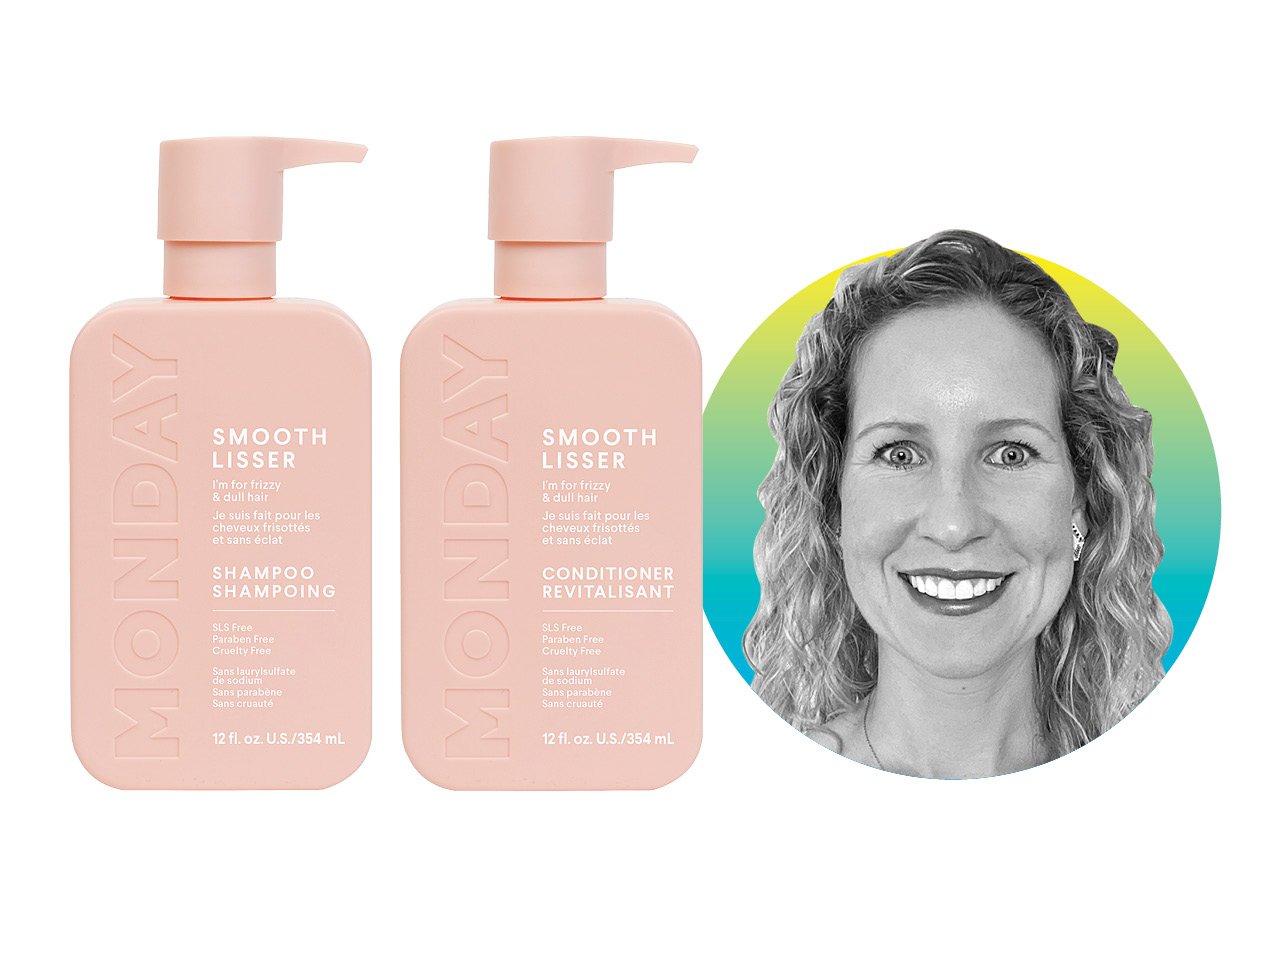 A Chatelaine reader reviews Monday Haircare Smooth Shampoo and Conditioner.